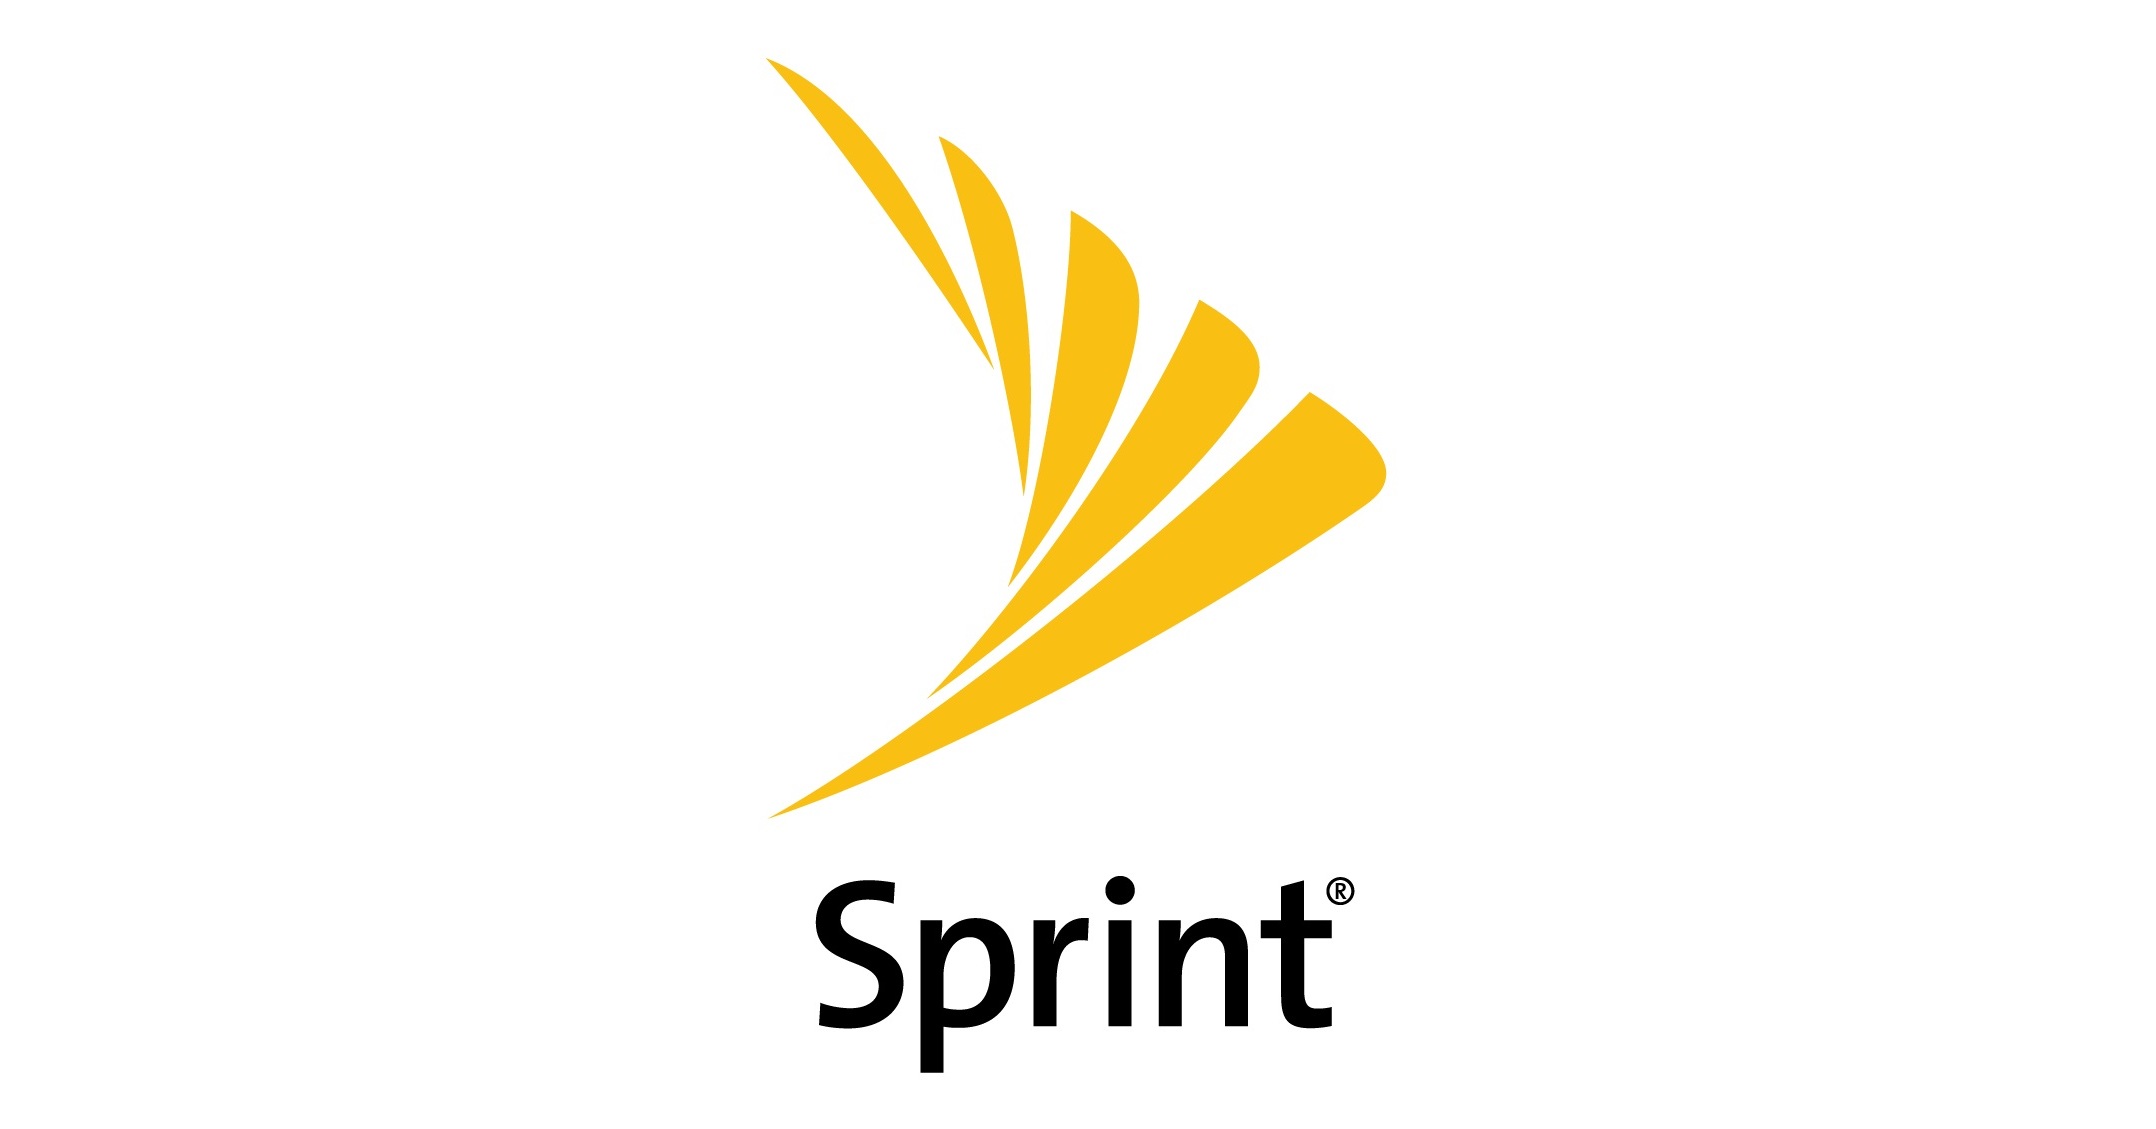 sprint.com/activate - How to Activate a Sprint Phone